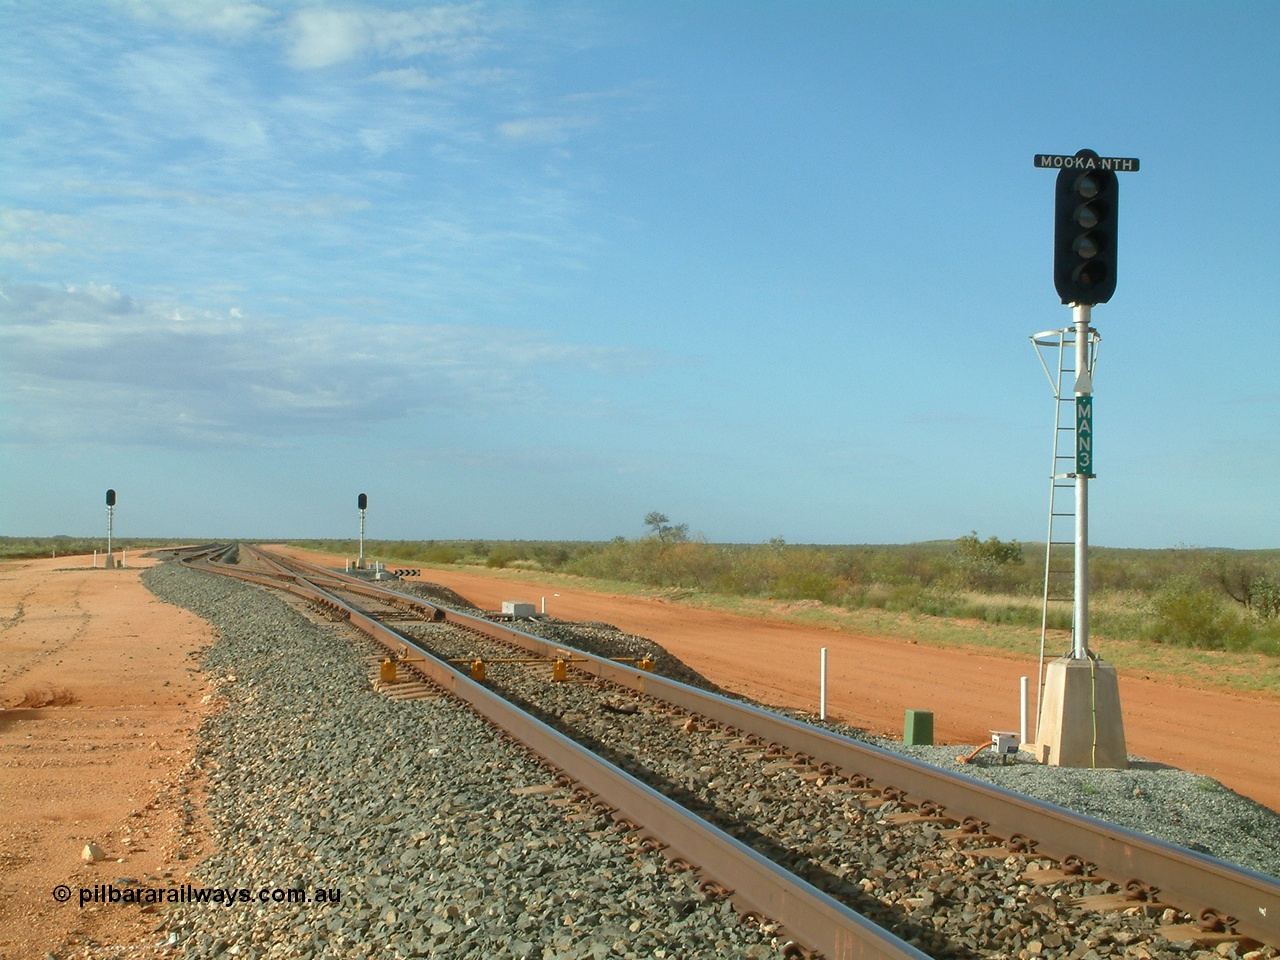 040407 075227
Mooka Siding, north end looking south past the arrival signal LED type MAN 3, DED 'dragging equipment detector' bars are visible before the turnout, passing track branching off to the left. 7th April 2004.
